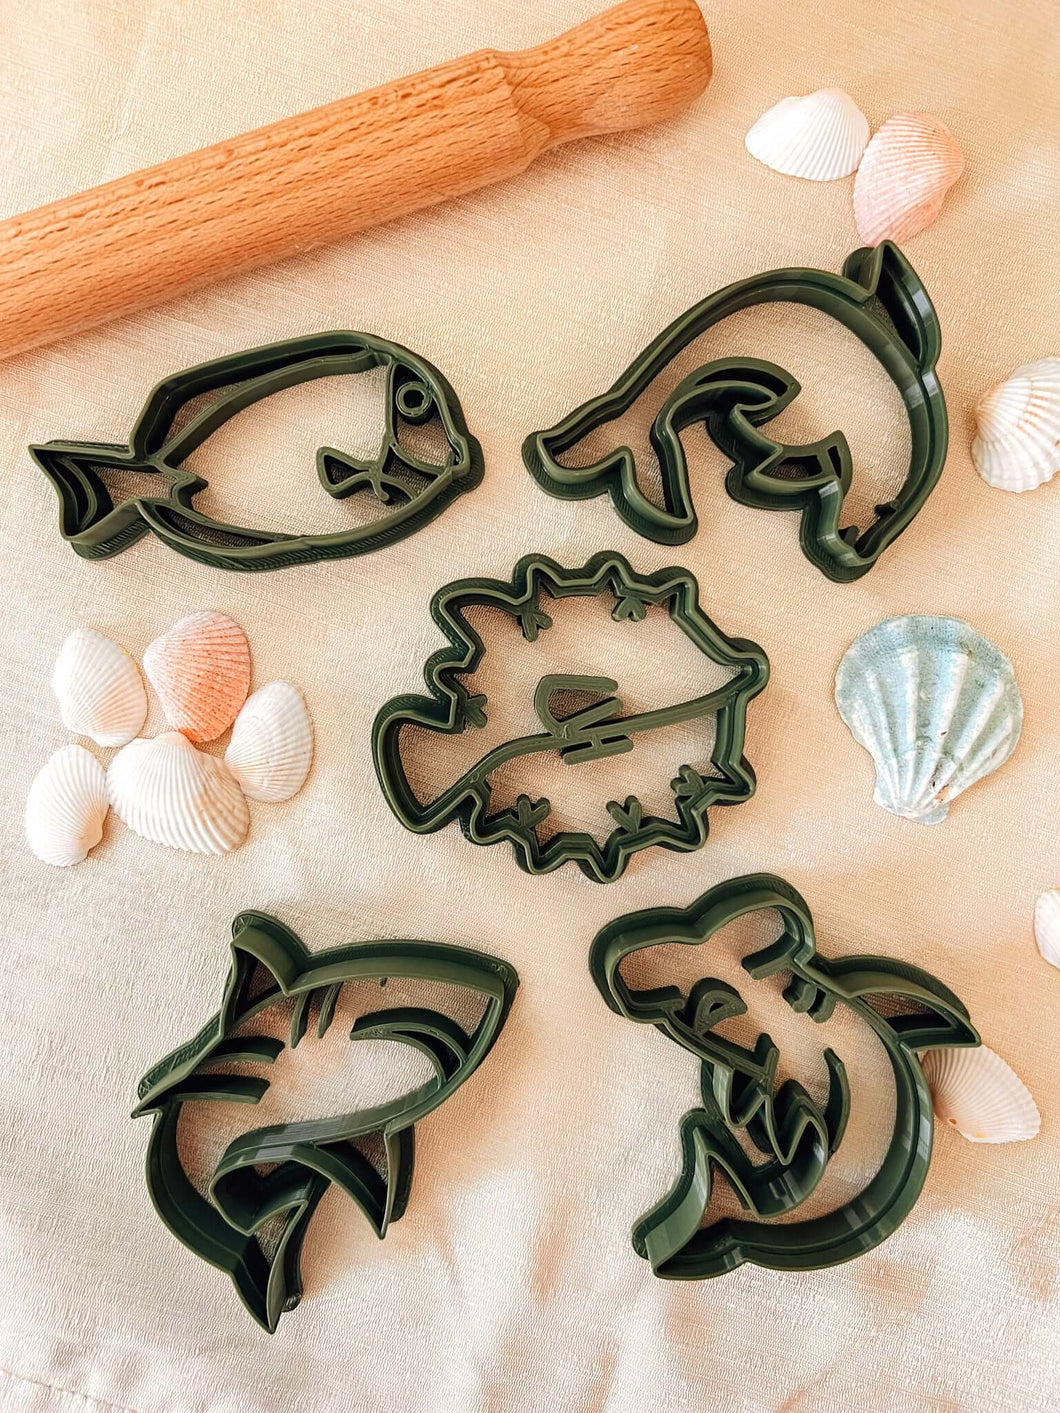 Under The Sea Collection